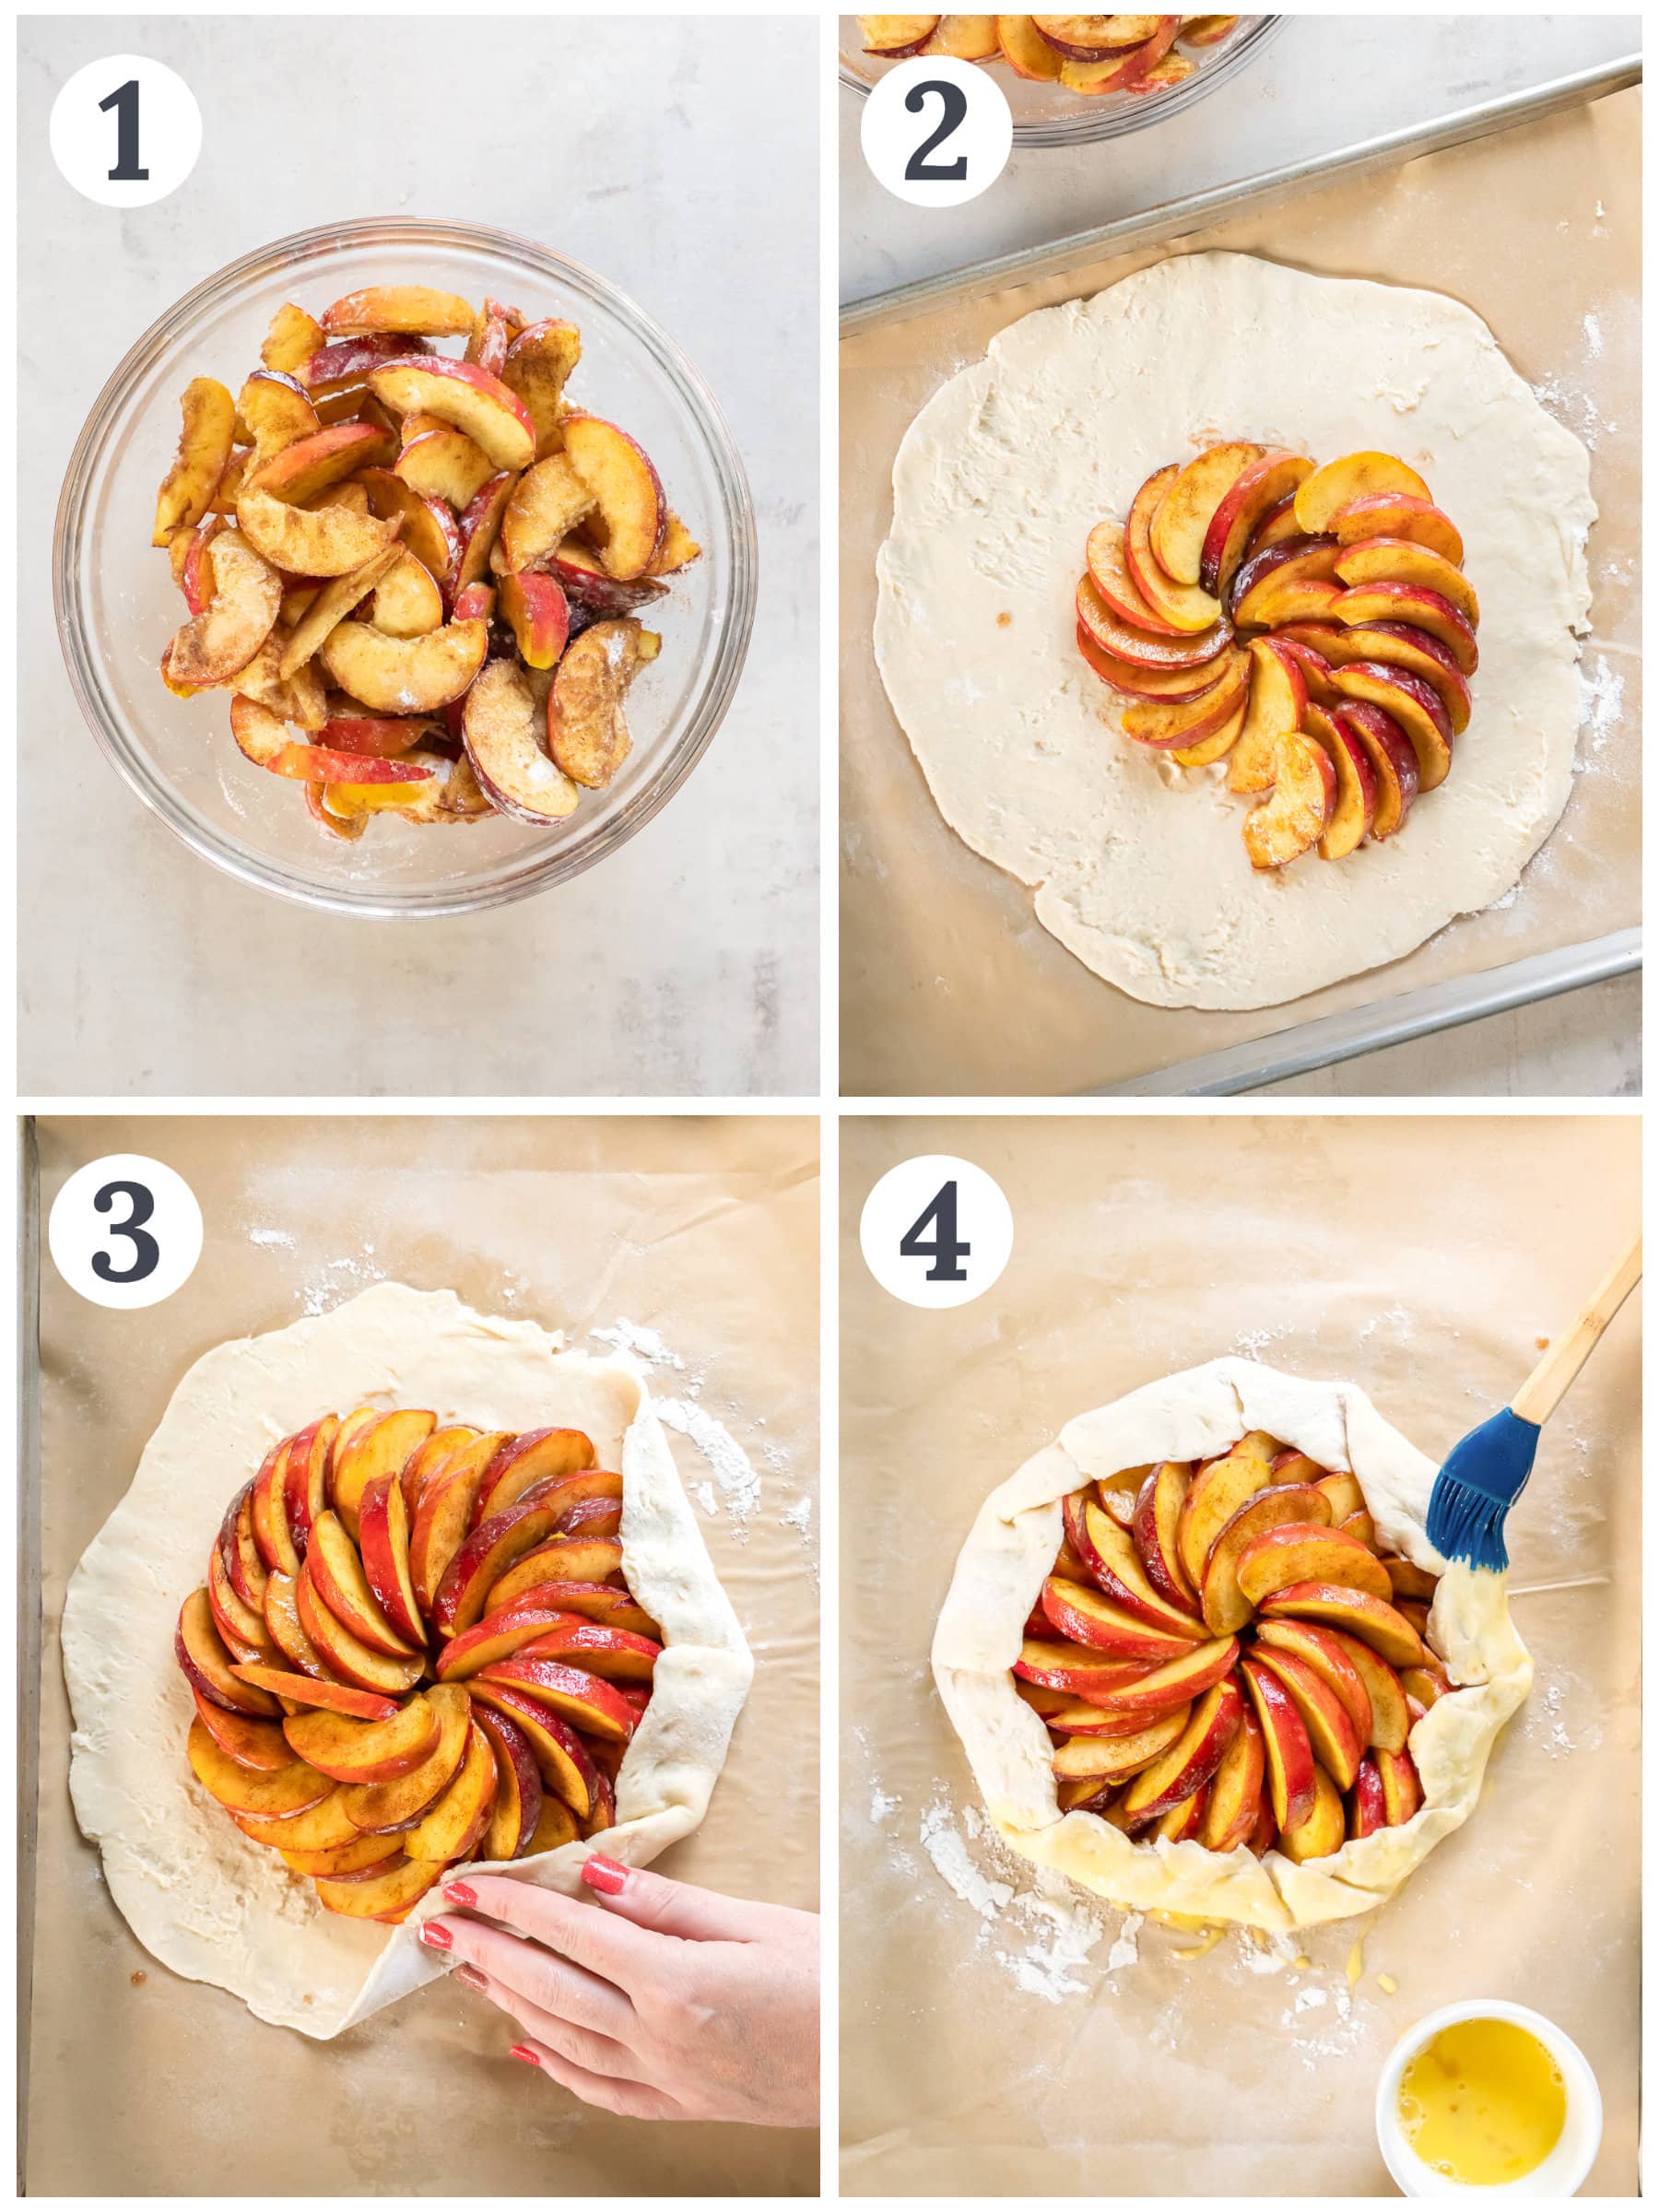 photo collage demonstrating how to make and assemble a peach galette.